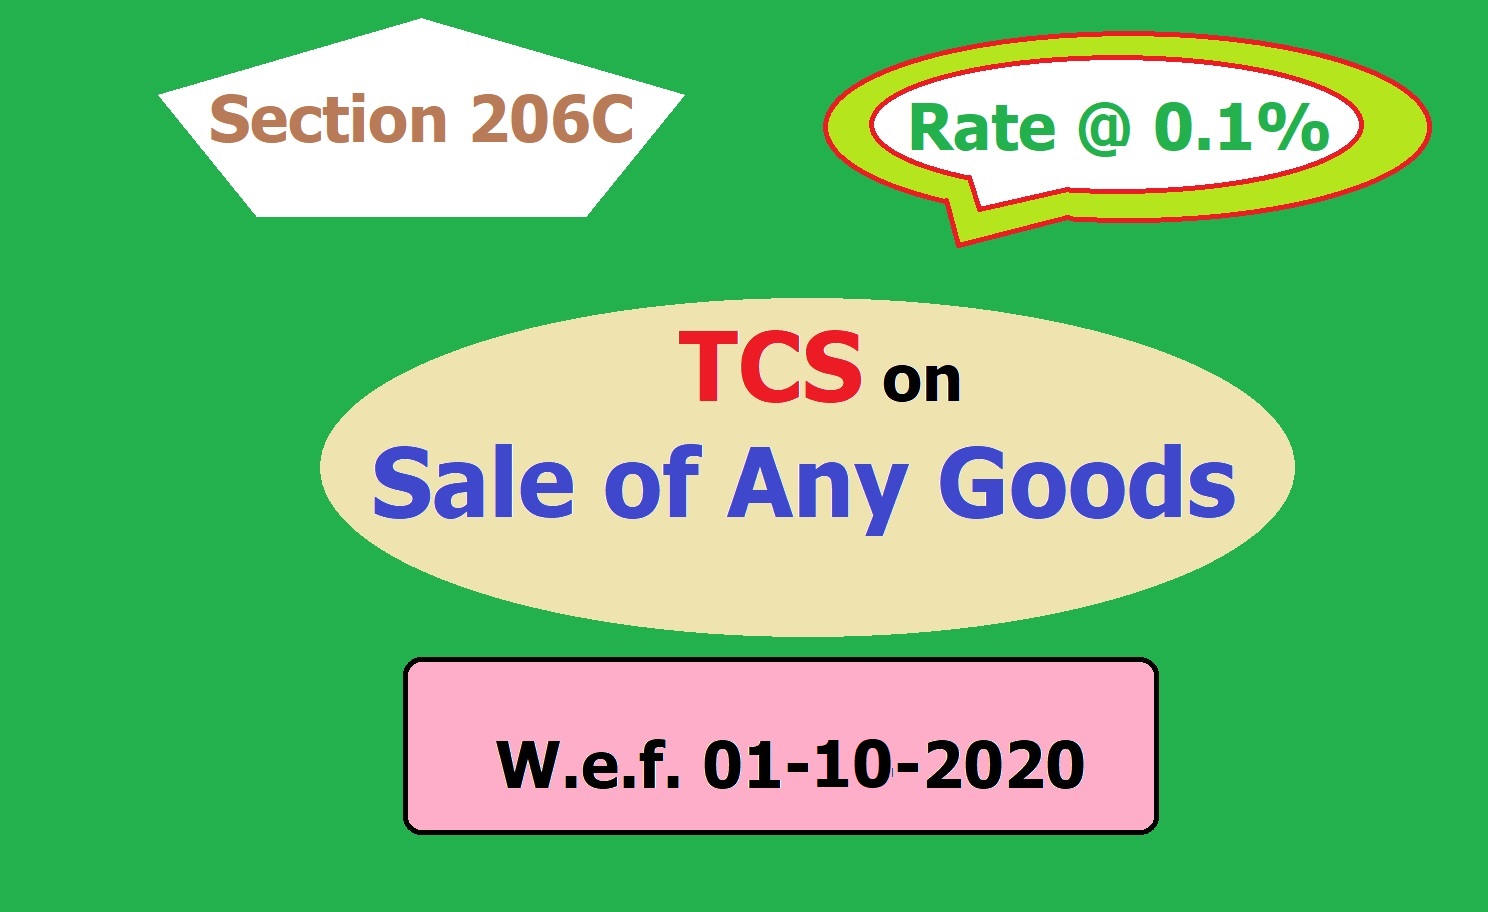 TCS on Sales - Section 206C (1H)